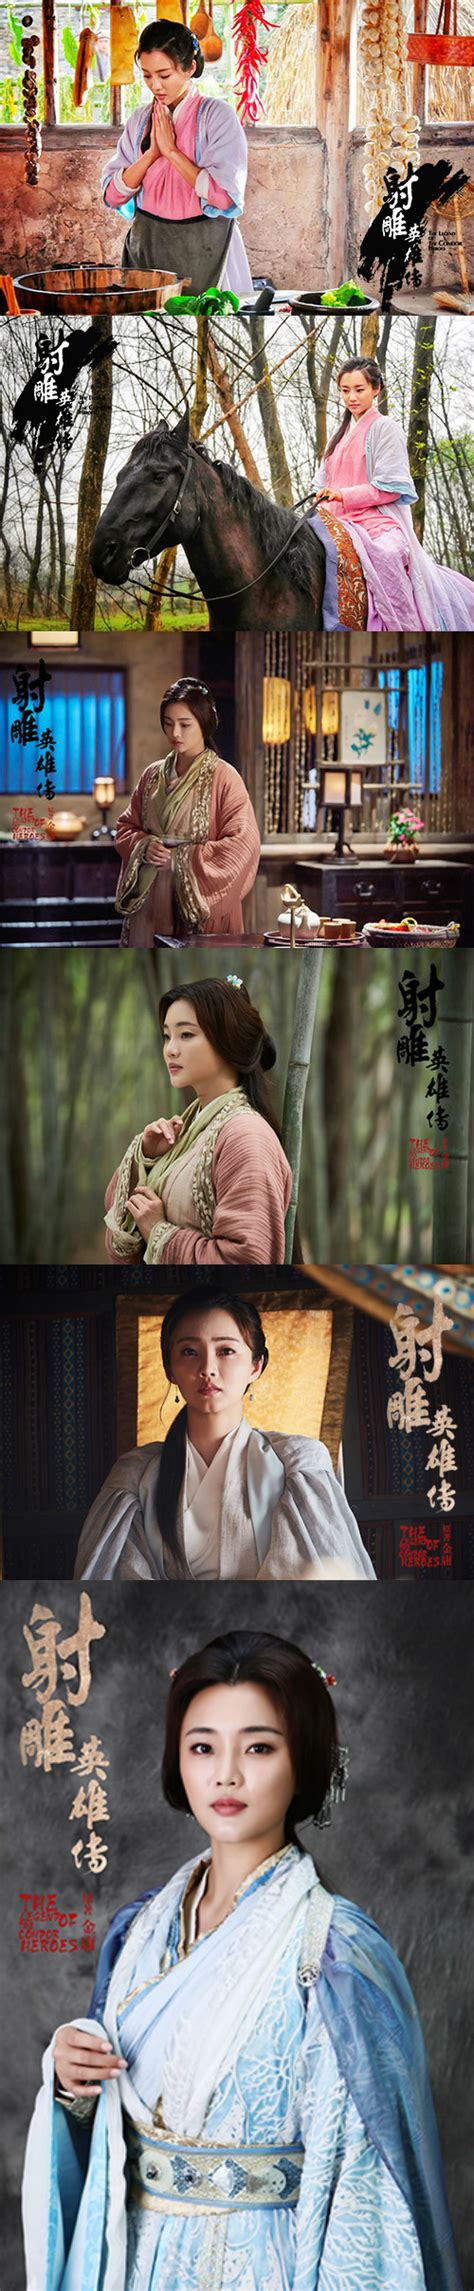 Based on the novel legend of condor hero by jin yong, the story is set in the middle of song dynasty and at the beginning of the nuzhen invasion of china. The Legend of the Condor Heroes (2017 TV series) 《射雕英雄传 ...